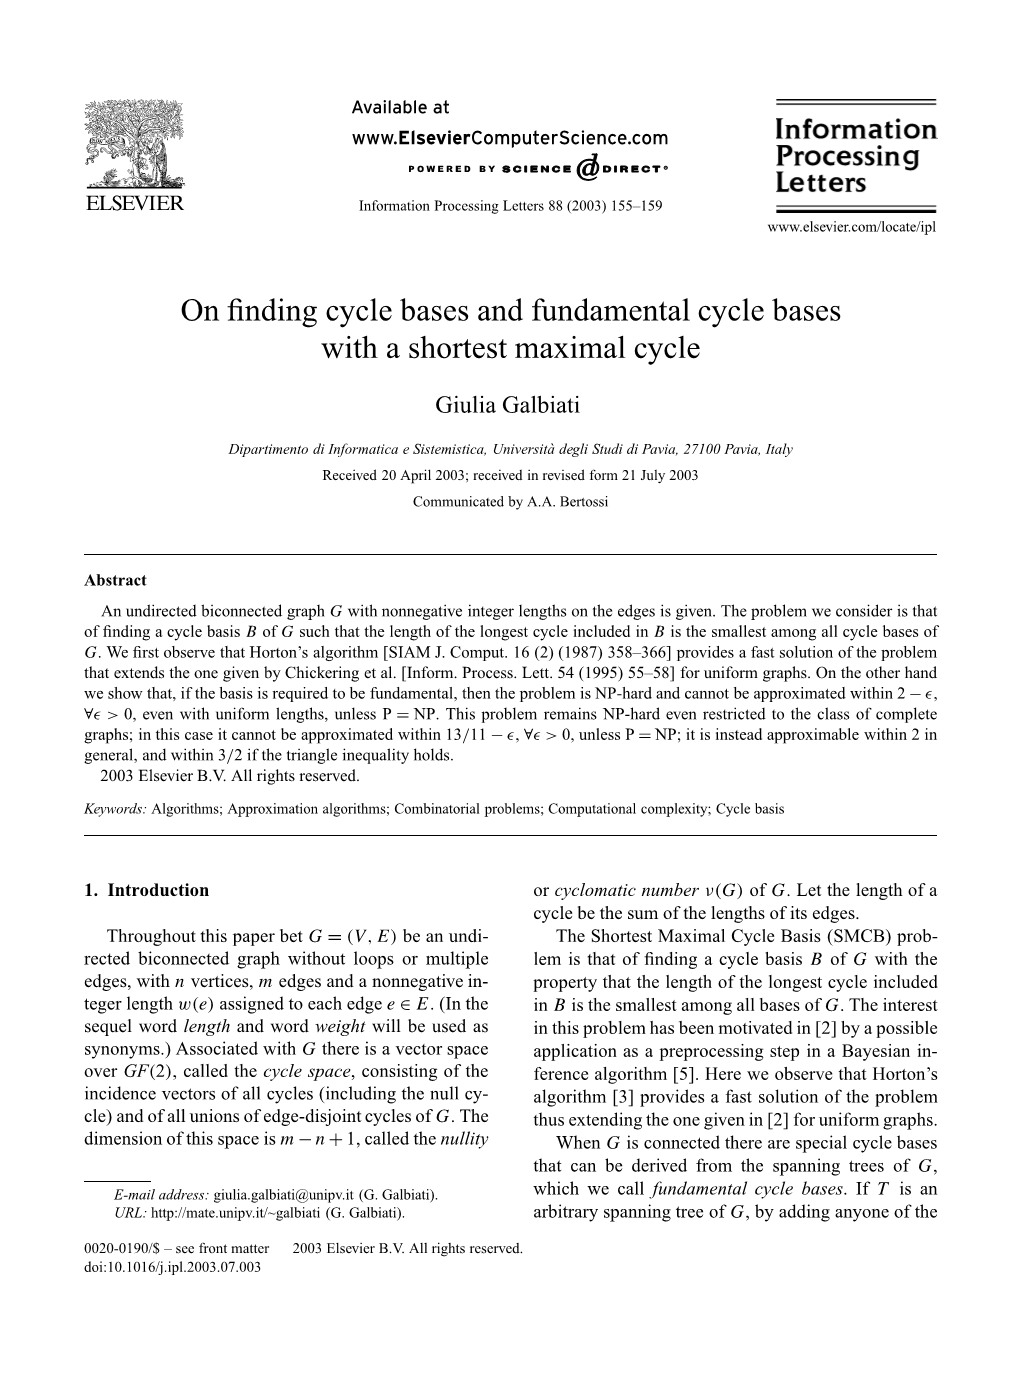 On Finding Cycle Bases and Fundamental Cycle Bases with a Shortest Maximal Cycle